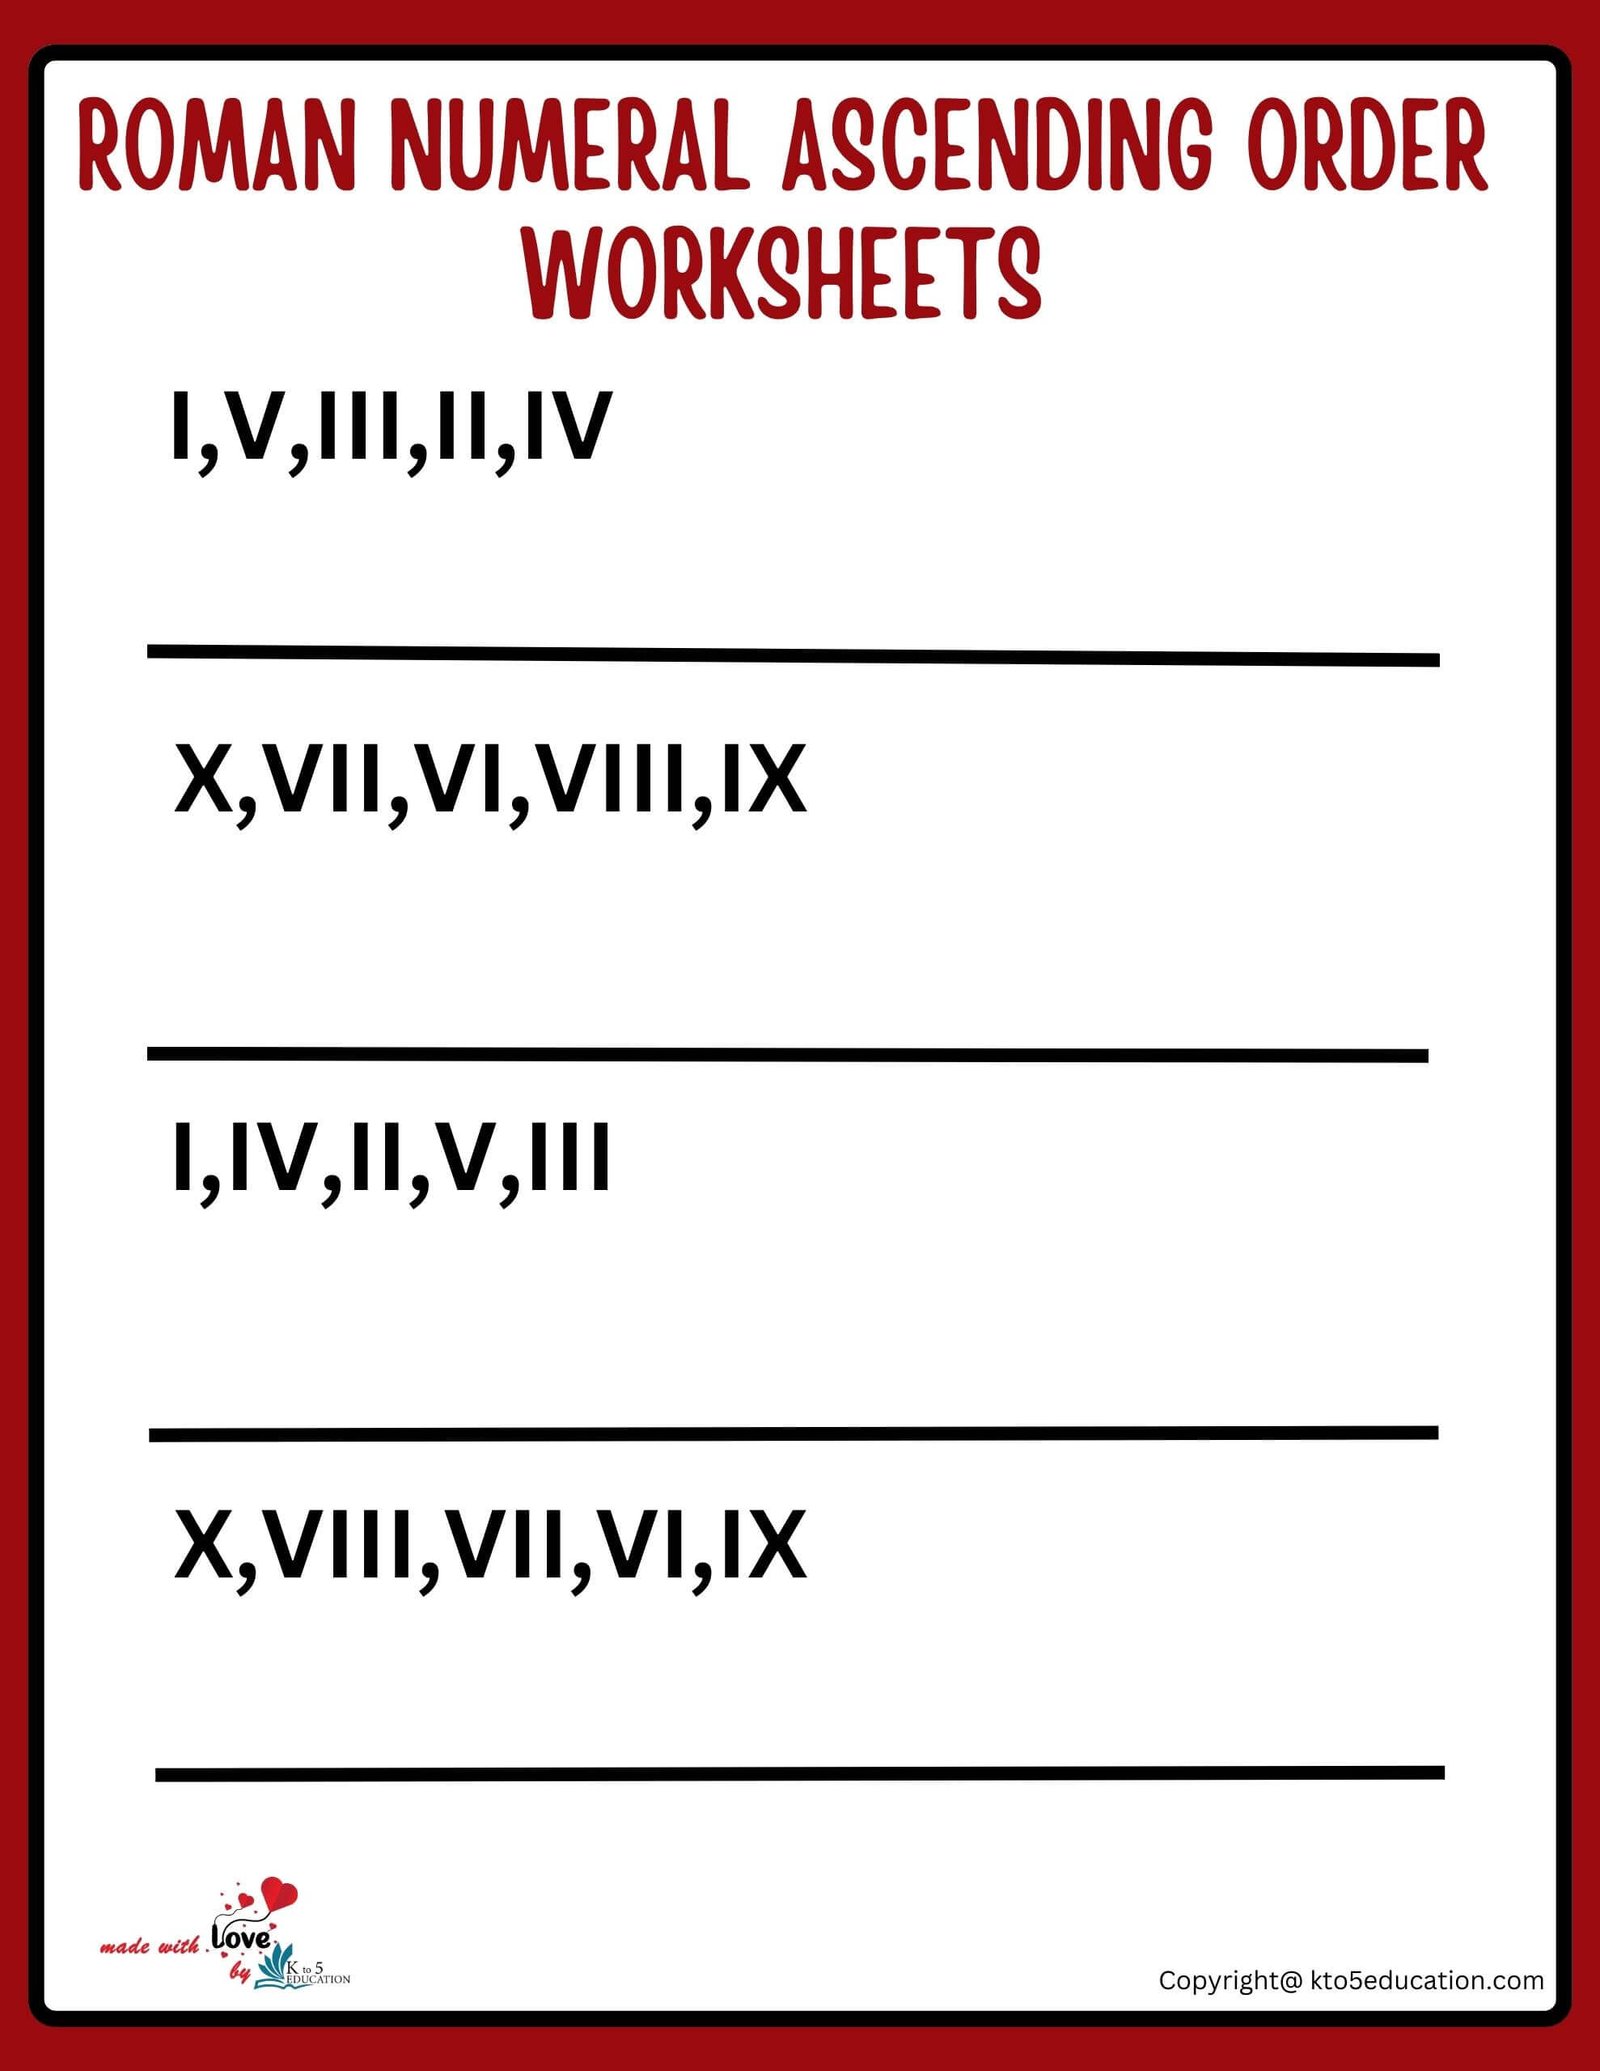 Roman Numeral Ascending Ordering Worksheets Grade 5 1 to 10